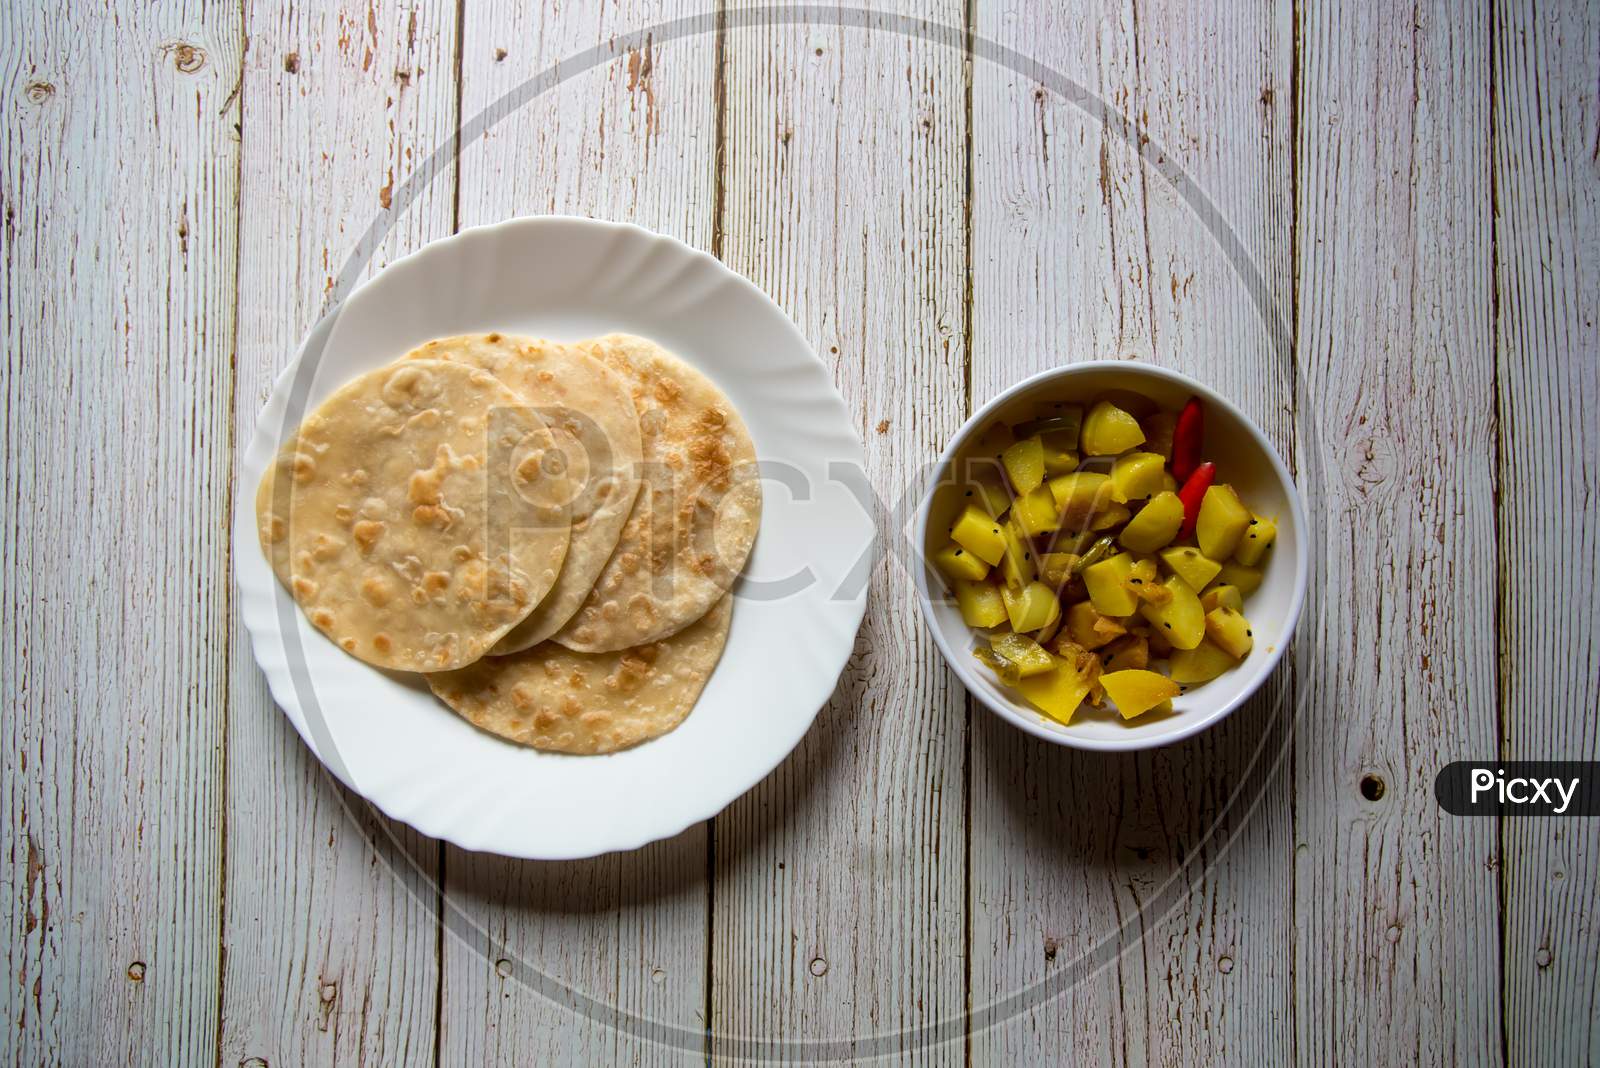 Top view of popular Indian breakfast paratha with fried potatoes